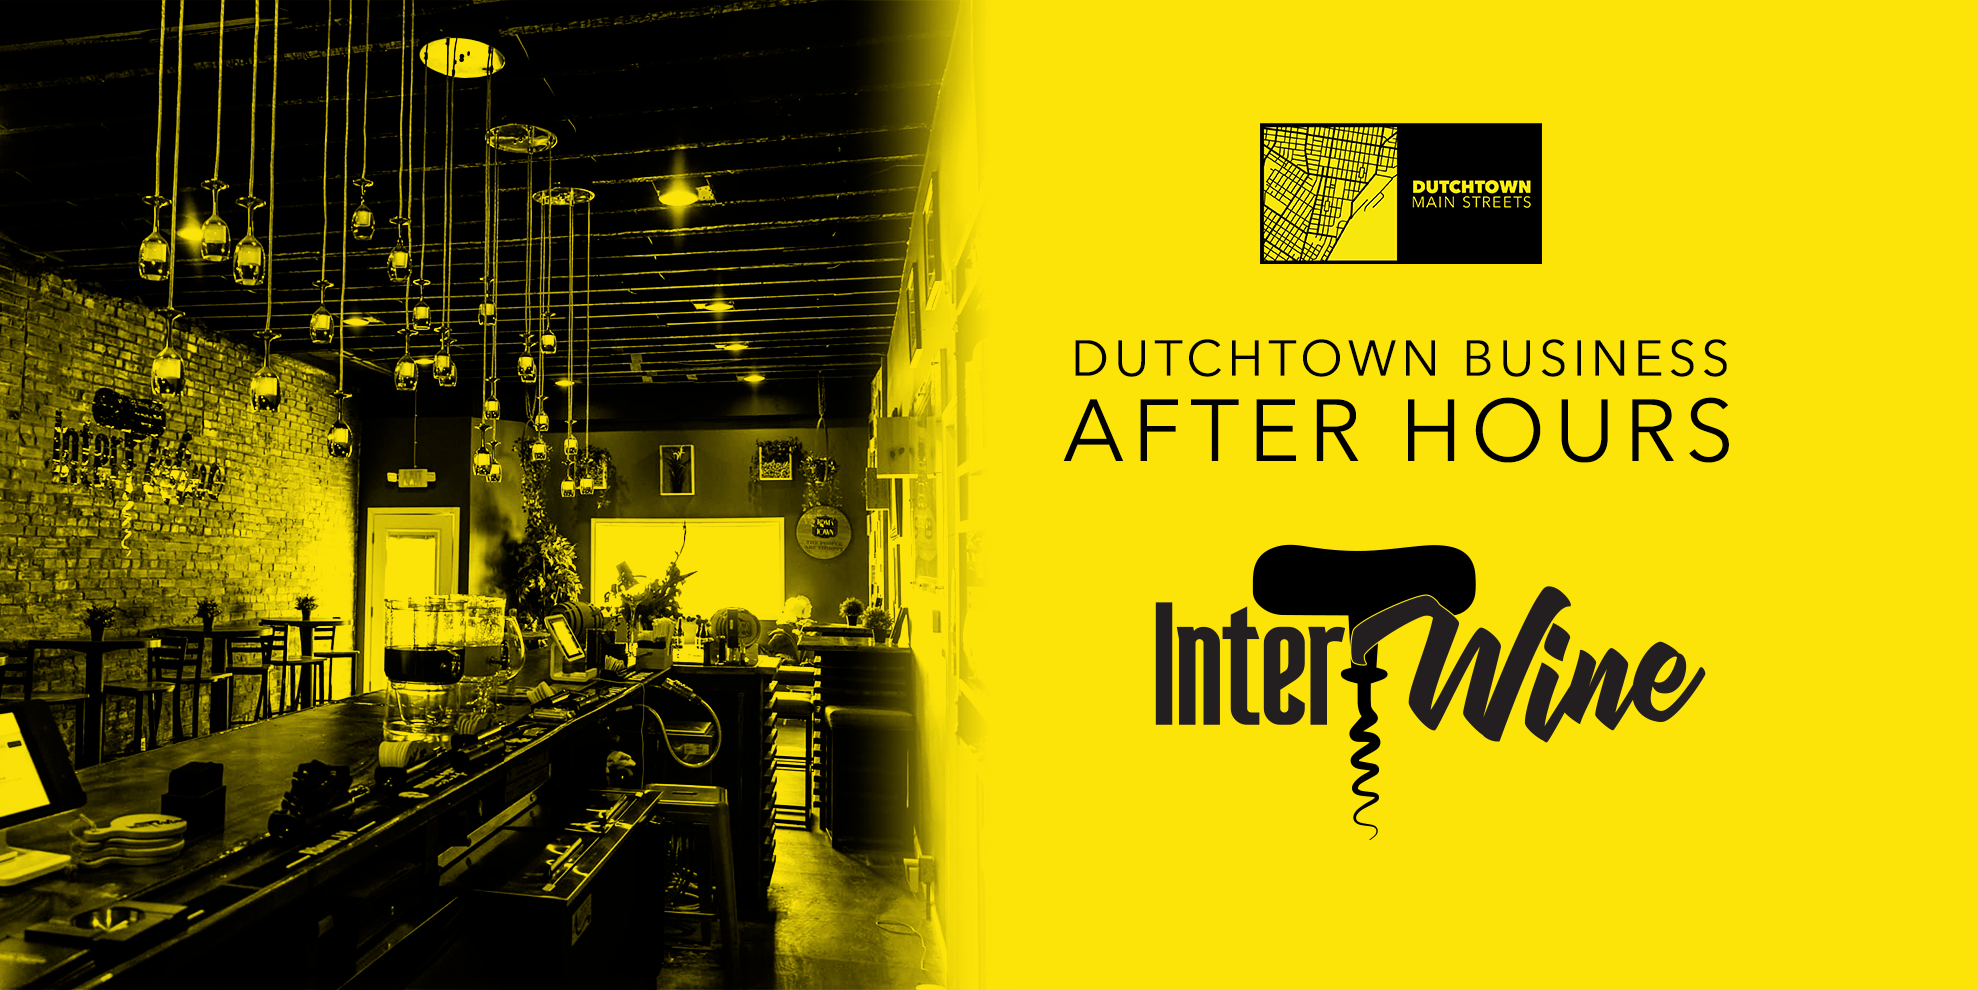 Dutchtown Business After Hours at IntertWine Wine Bar in Dutchtown, St. Louis, MO.